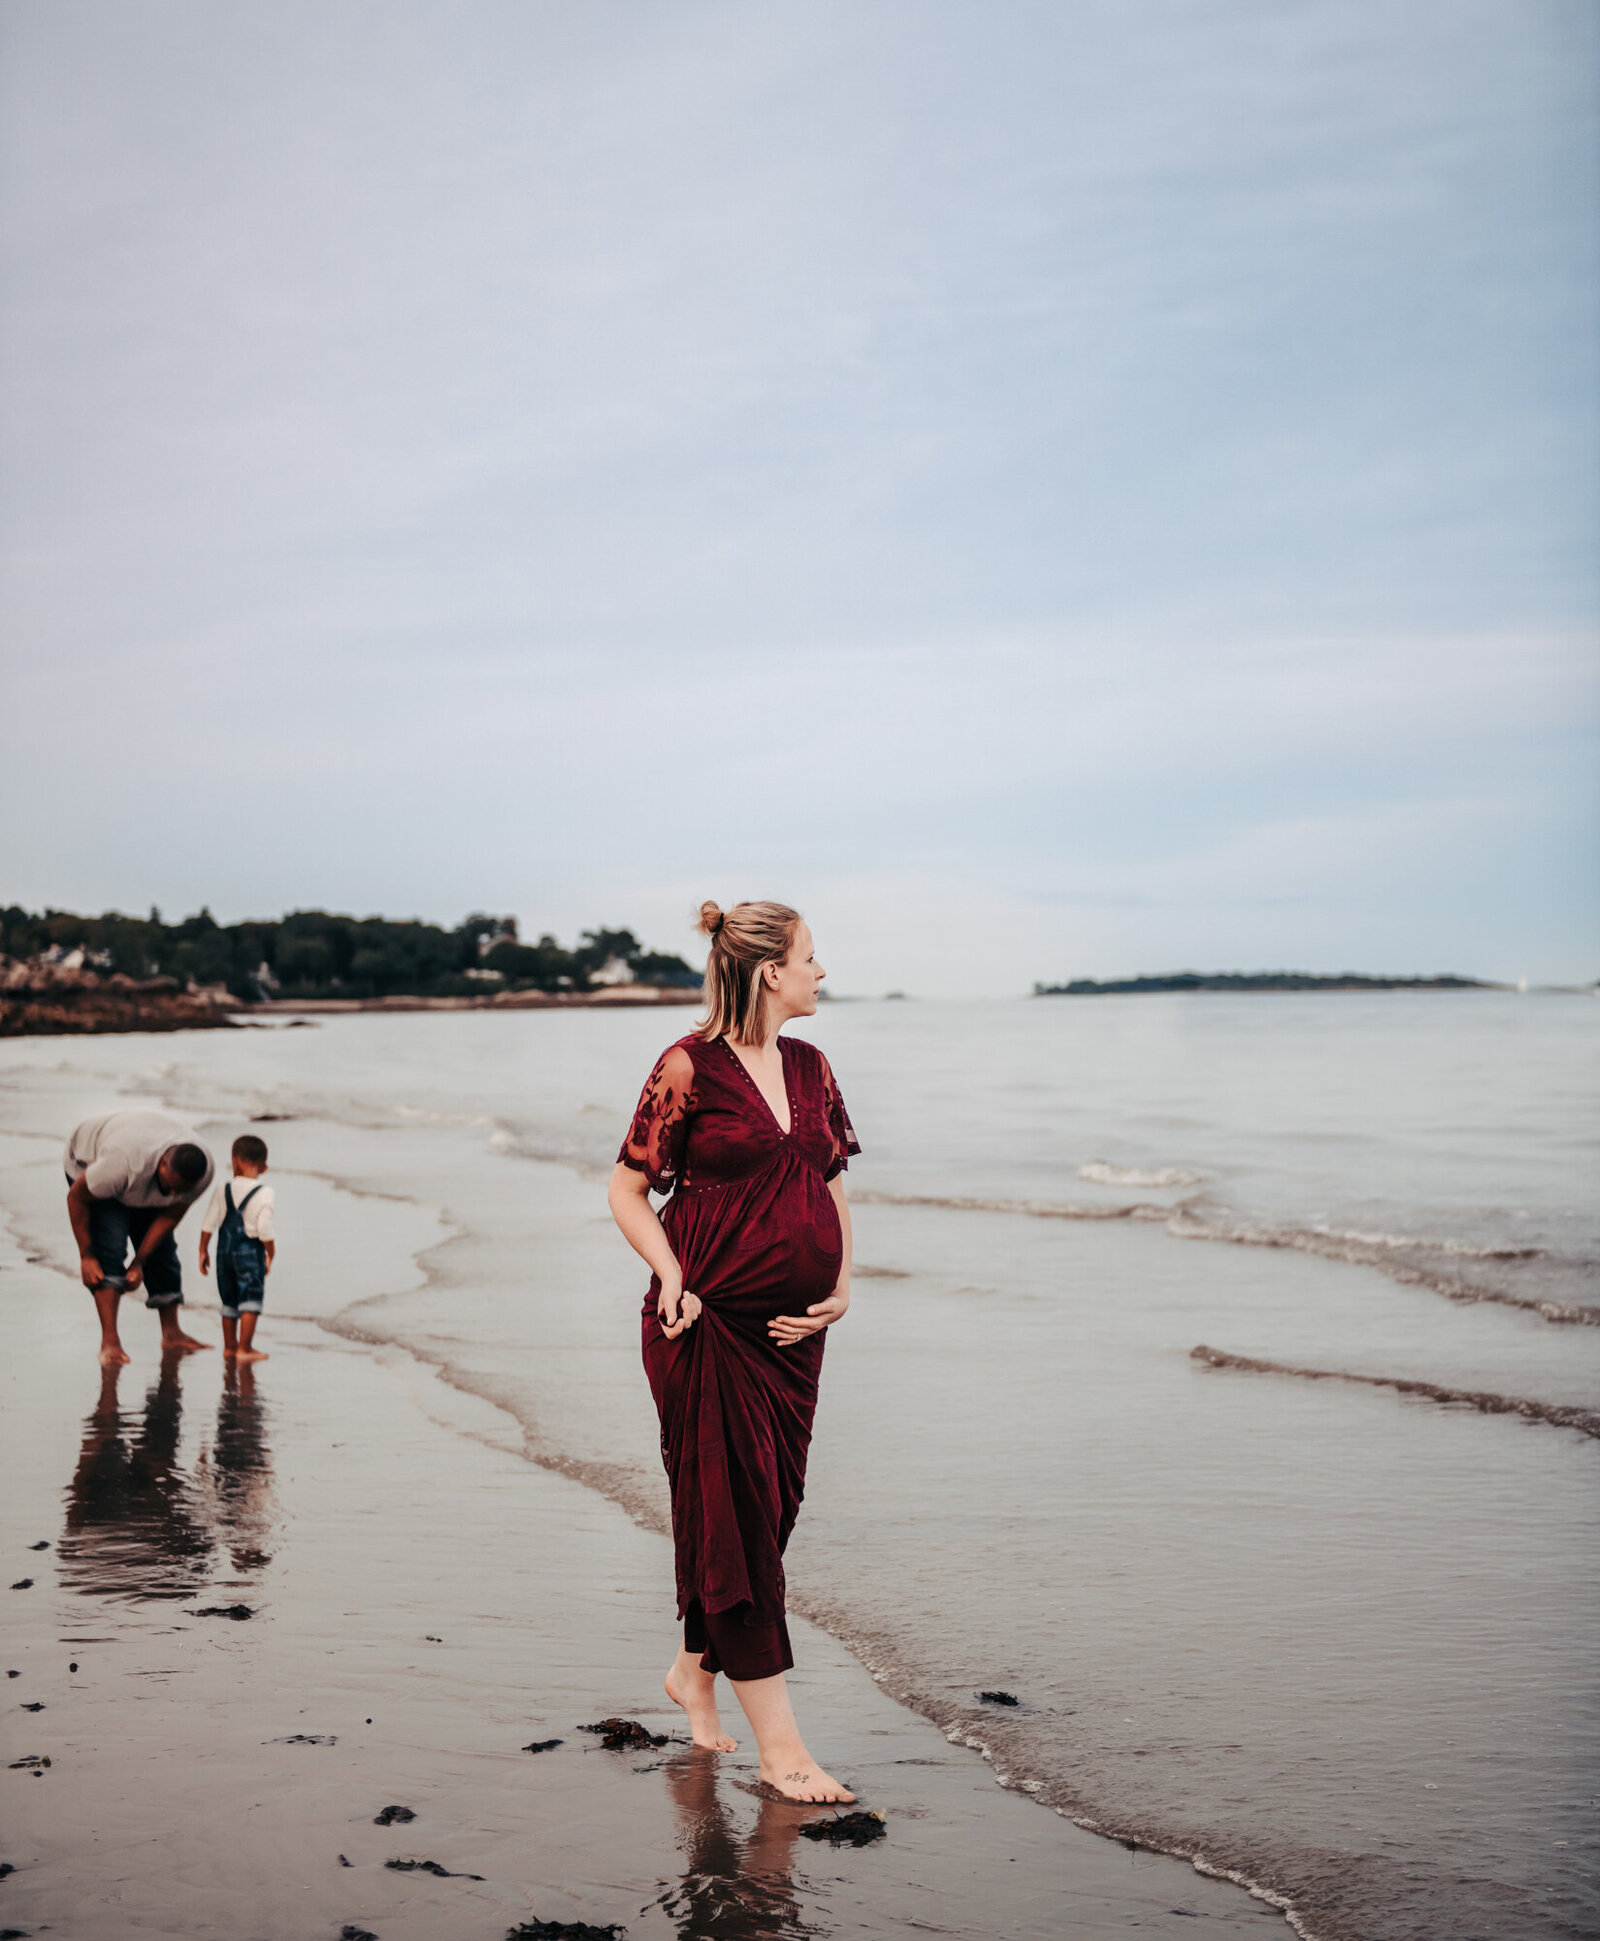 Maternity Photographer, Pregnant woman wearing a dress walking on a beach while a man and little boy play behind her.